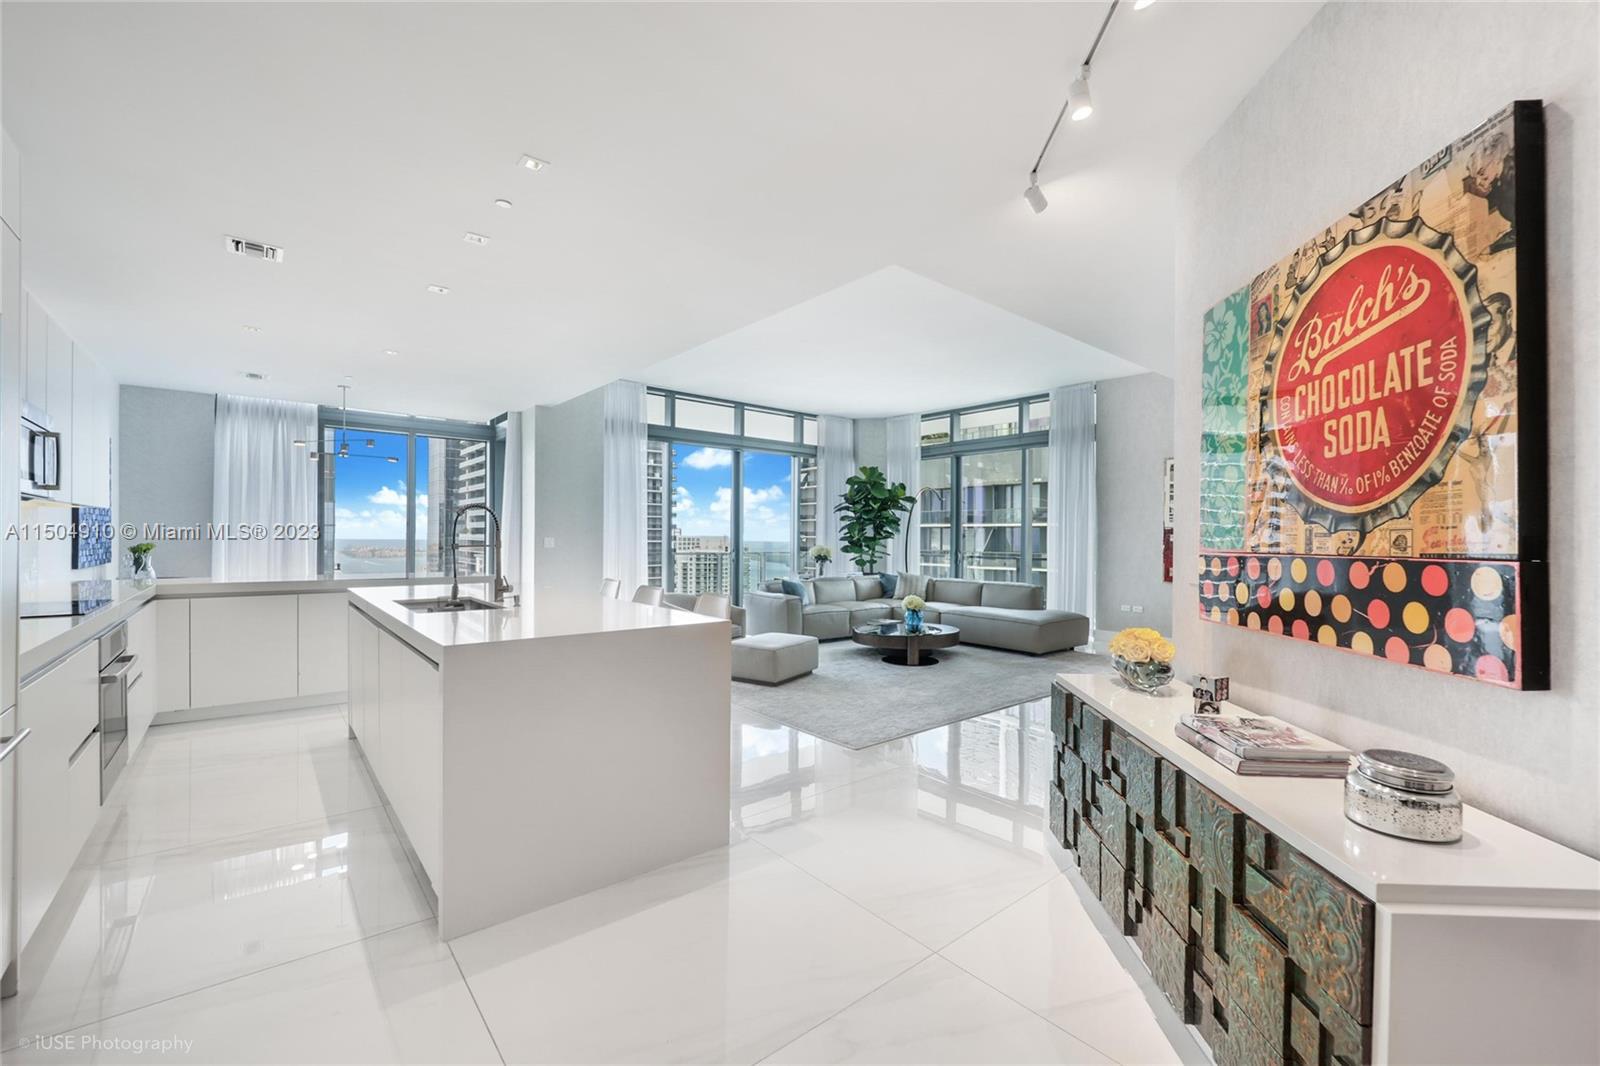 Stunning corner 4BR/4.5BA lower penthouse unit offering breathtaking panoramic water and skyline views from sunrise to sunset in the elegant Rise building adjacent to Brickell City Center Mall. 12' ceilings with 48"x48' white Italian porcelain floors throughout the unit recently installed in 2022. Custom Italian finishes and upgrades throughout the apartment. Large wraparound 9ft deep balconies offering 360-degree views. Walk-in closets in every bedroom featuring Italian cabinetry. Electrical window treatments and white custom shades. Quartz counter kitchen tops with waterfall island and floating cabinetry in bathrooms. Large laundry room w/ additional storage and maid's room w/bathroom. The unit includes 2 parking spaces and free valet service for visitors.